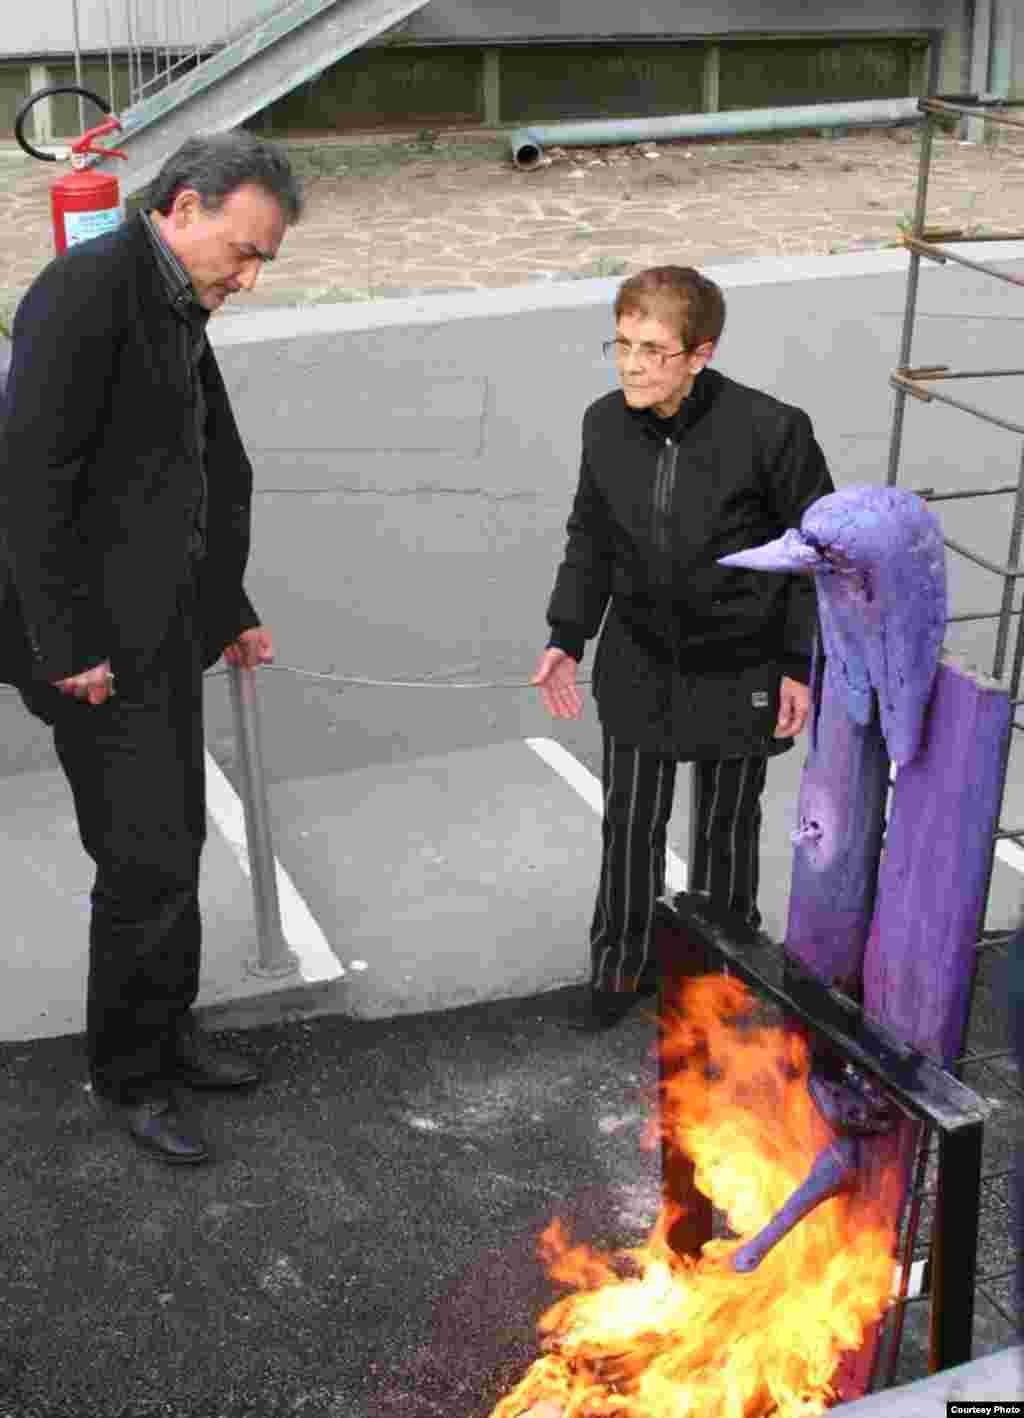 Italian artist Rosaria Matarese was there in person to see her &quot;Androgino&quot; torched on April 18.